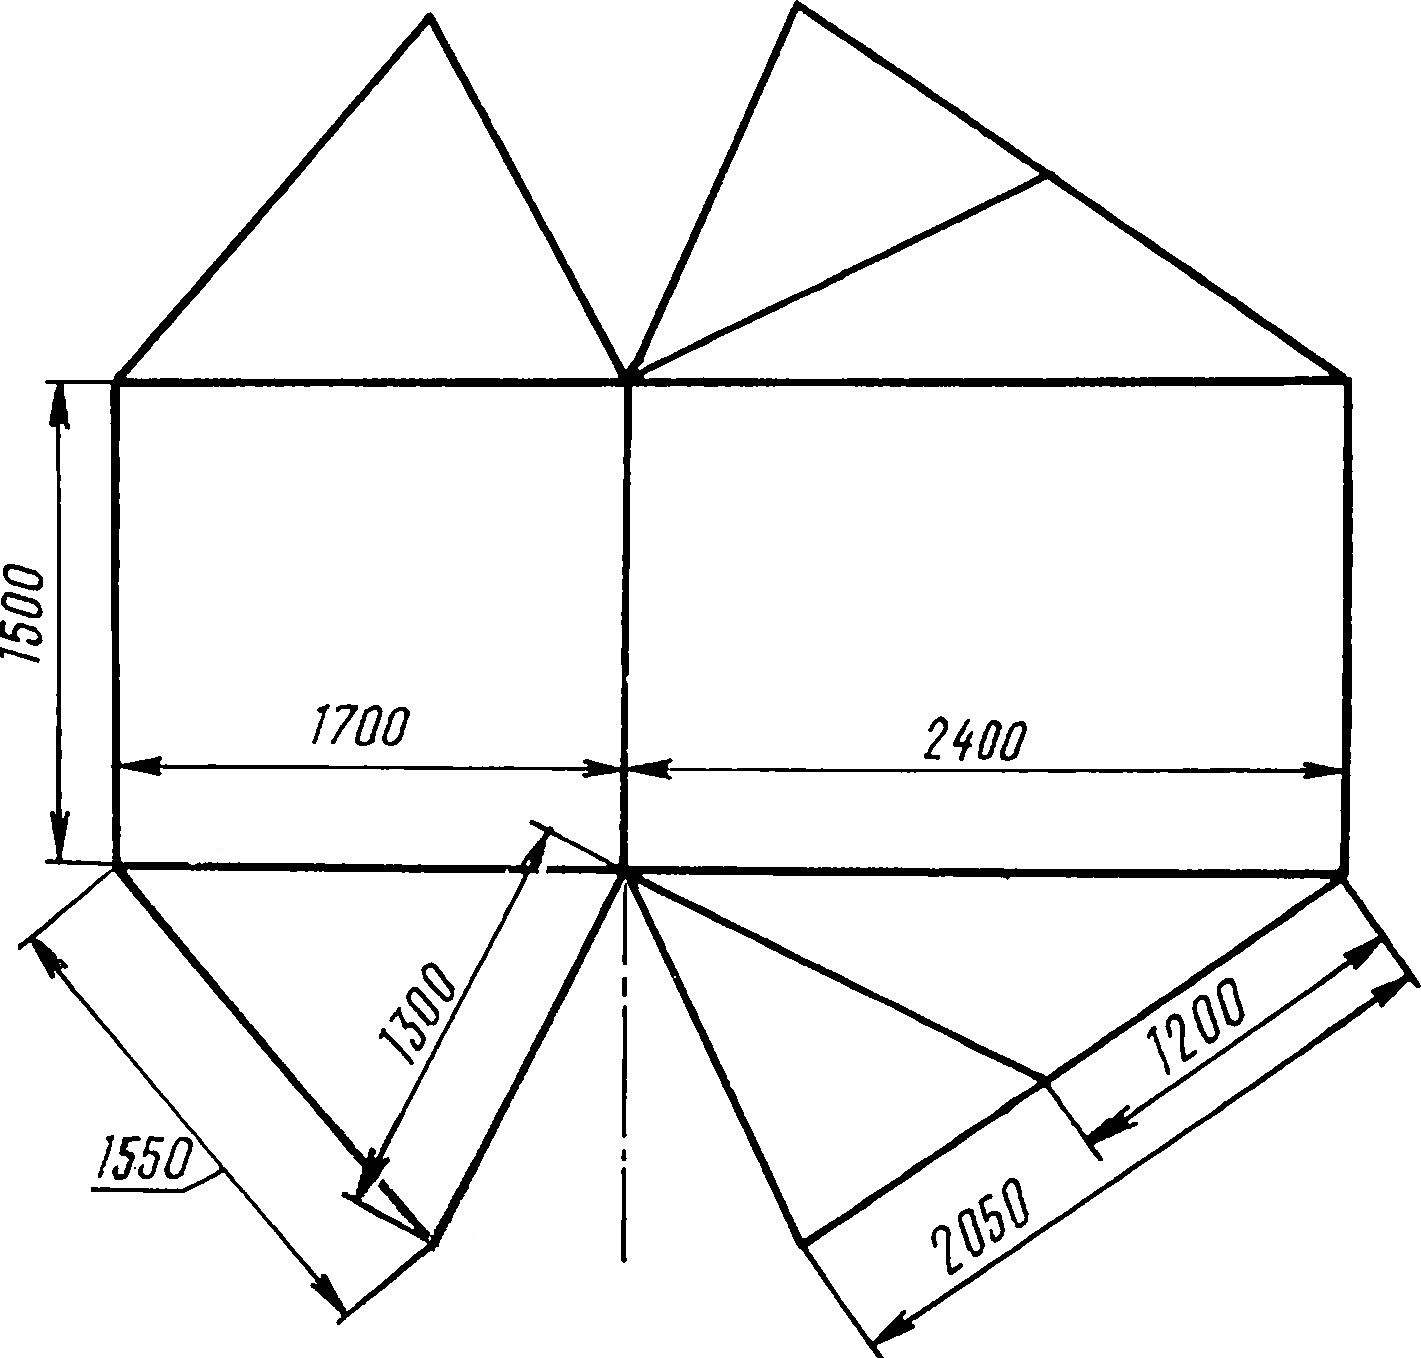 Fig. 2. The pattern of the tent.